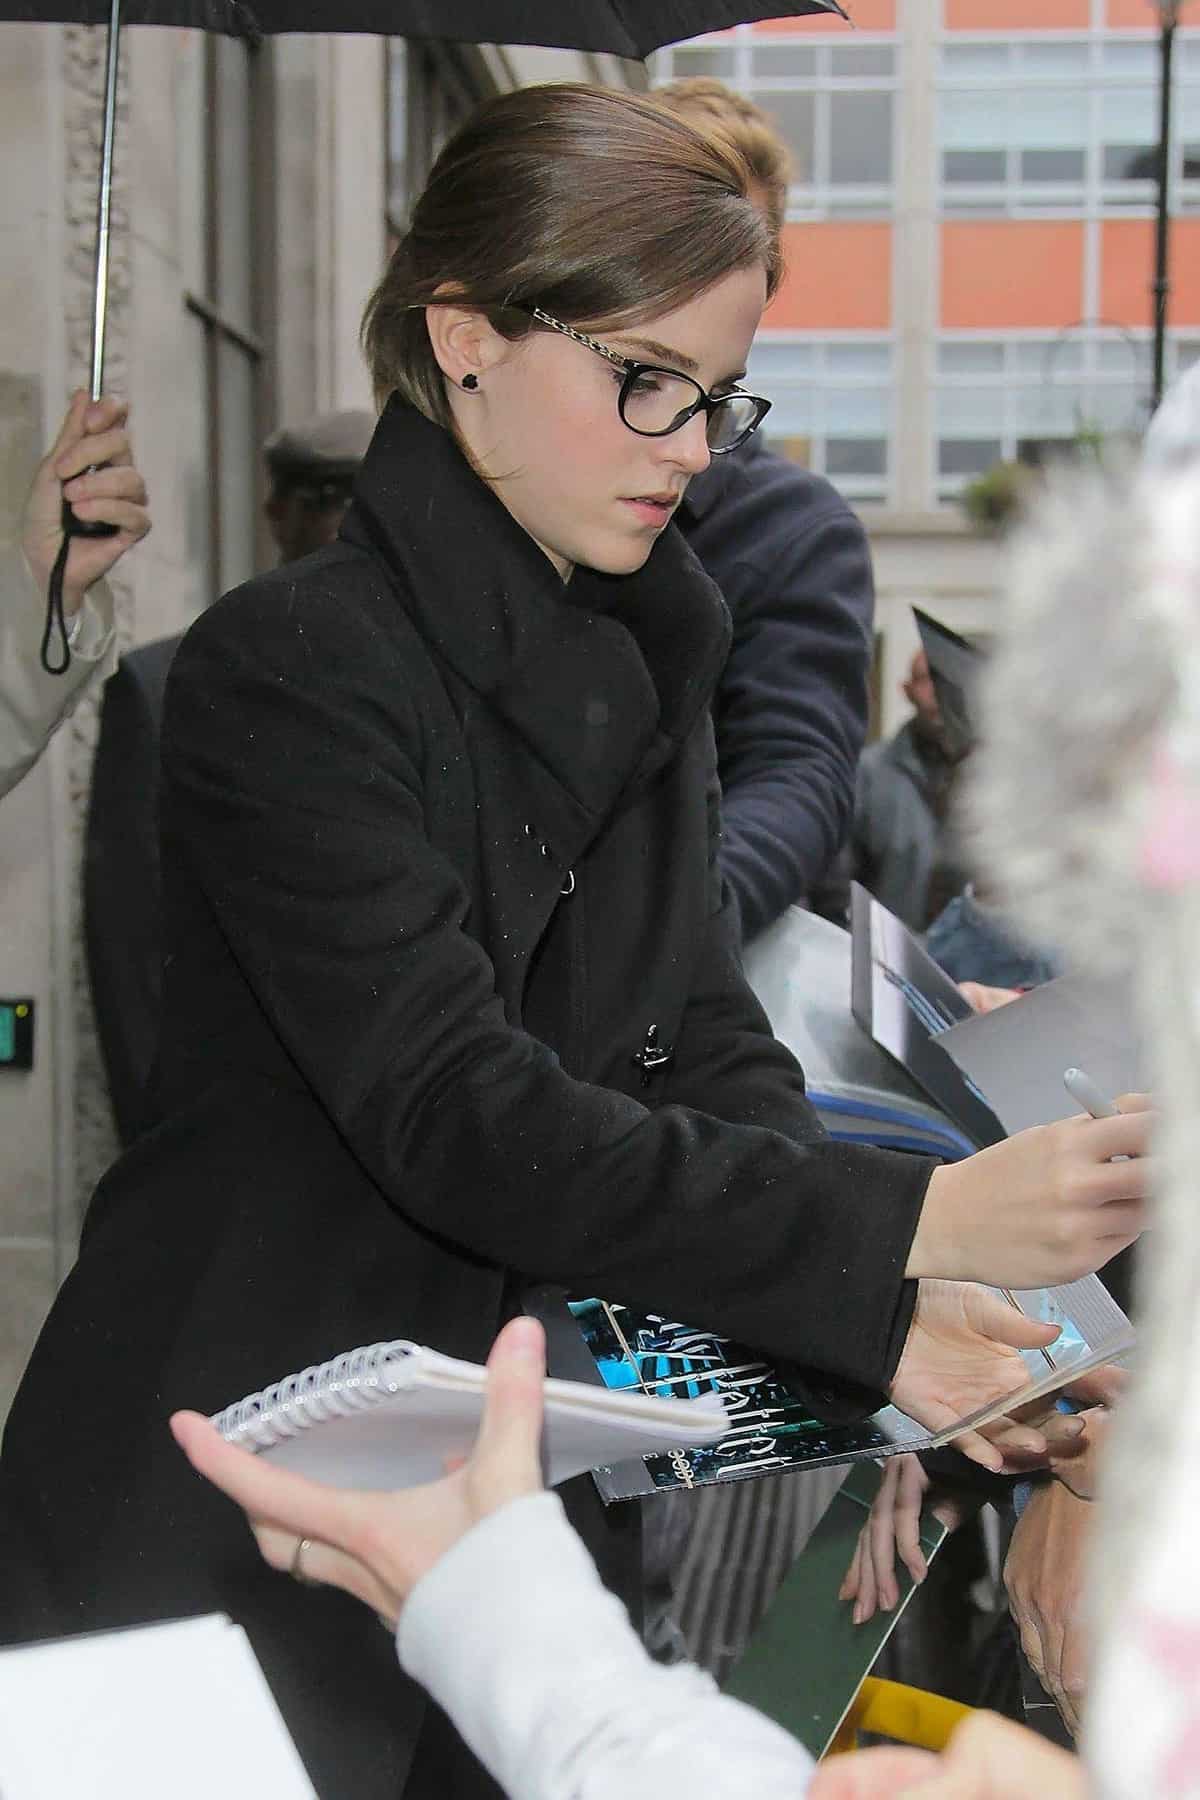 Emma Watson Arrives in Style at BBC Radio 1 Studios in London - 1